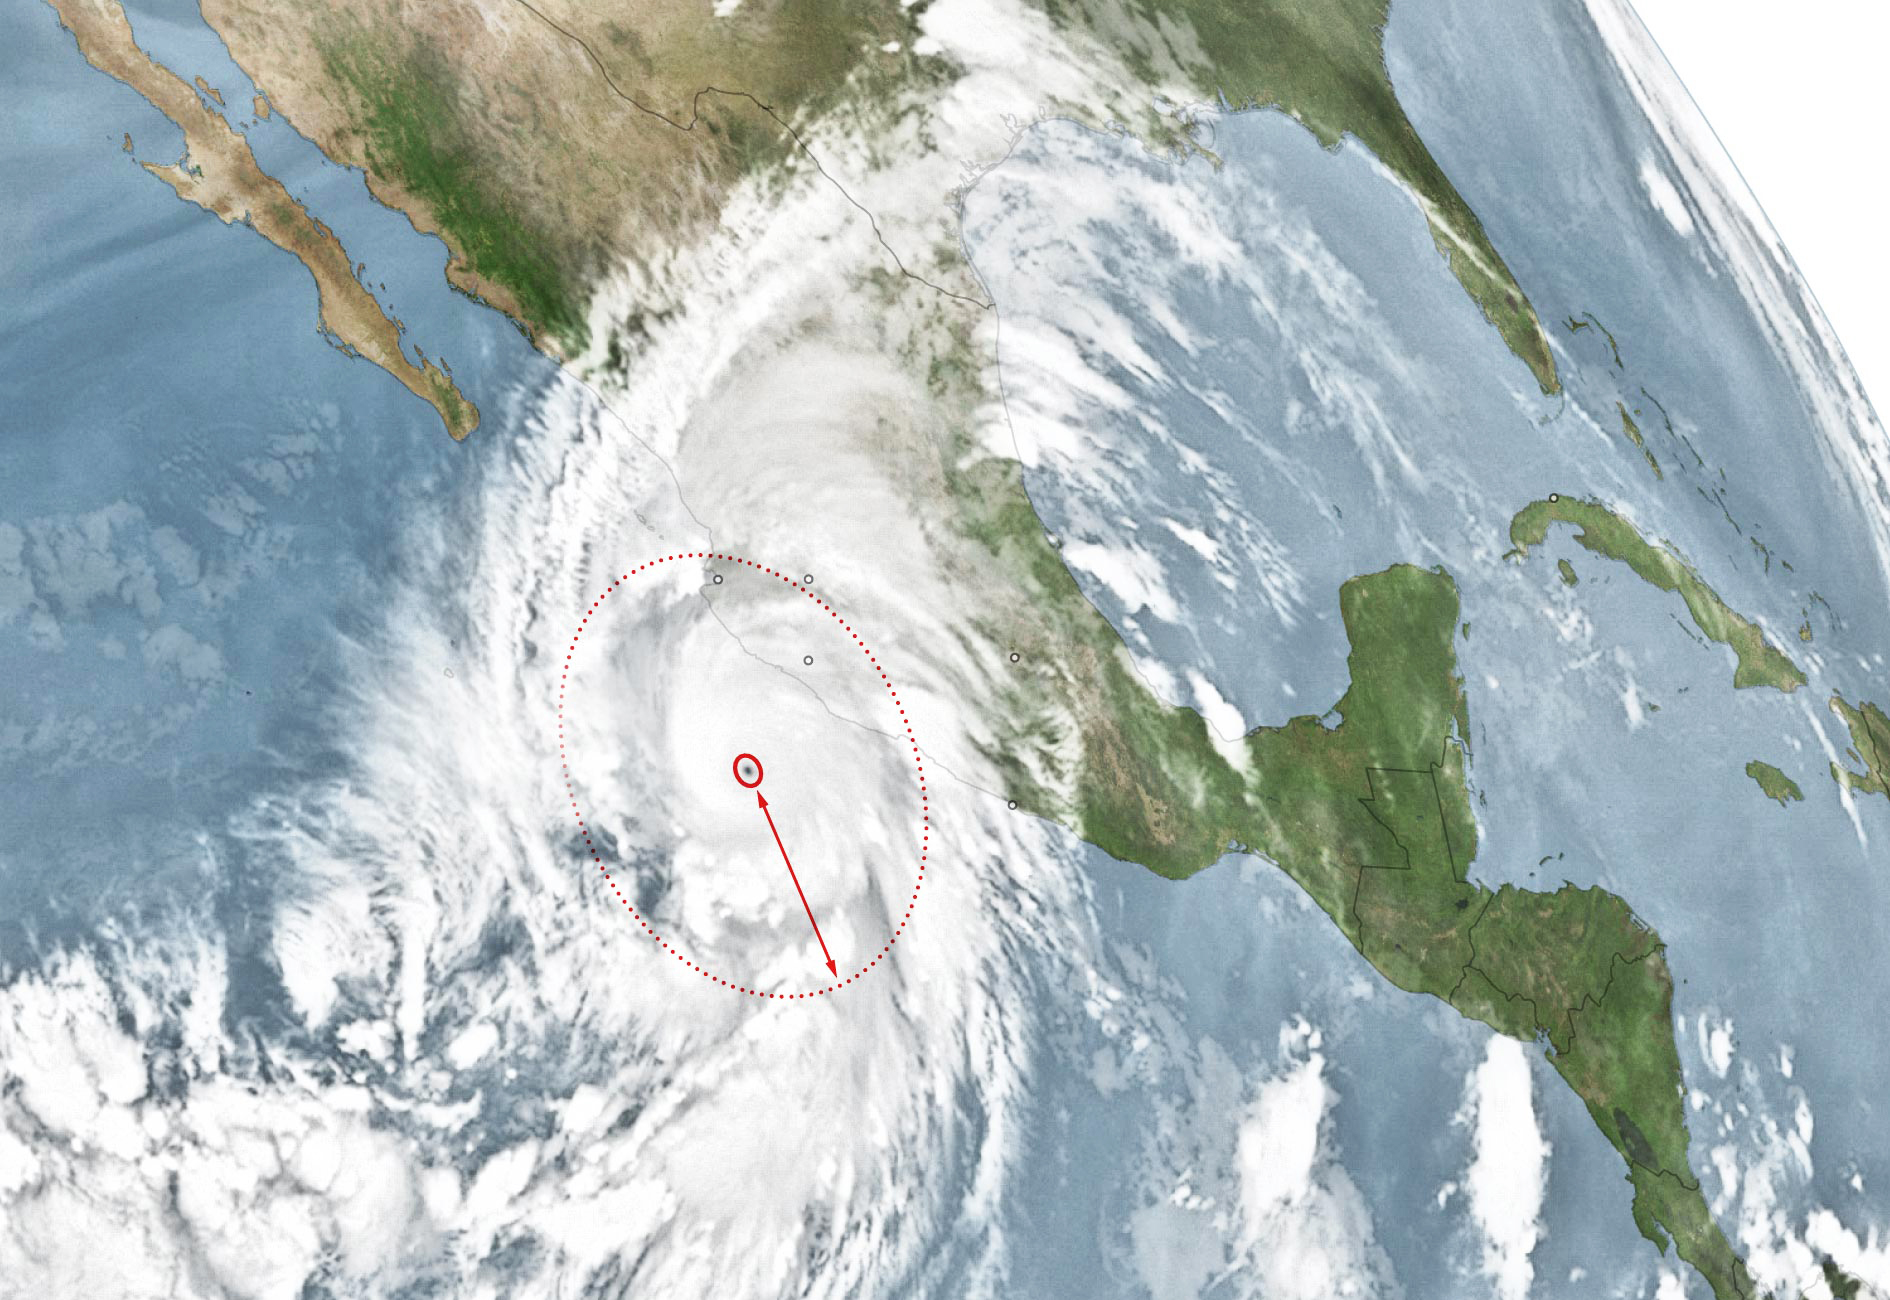 Hurricane Patricia: The lowest sea-level pressure in the Western Hemisphere, and the highest reliably-measured non-tornadic sustained winds, are recorded in Hurricane Patricia, which strikes Mexico hours later, killing at least 13 and causing over $280 million in damages.